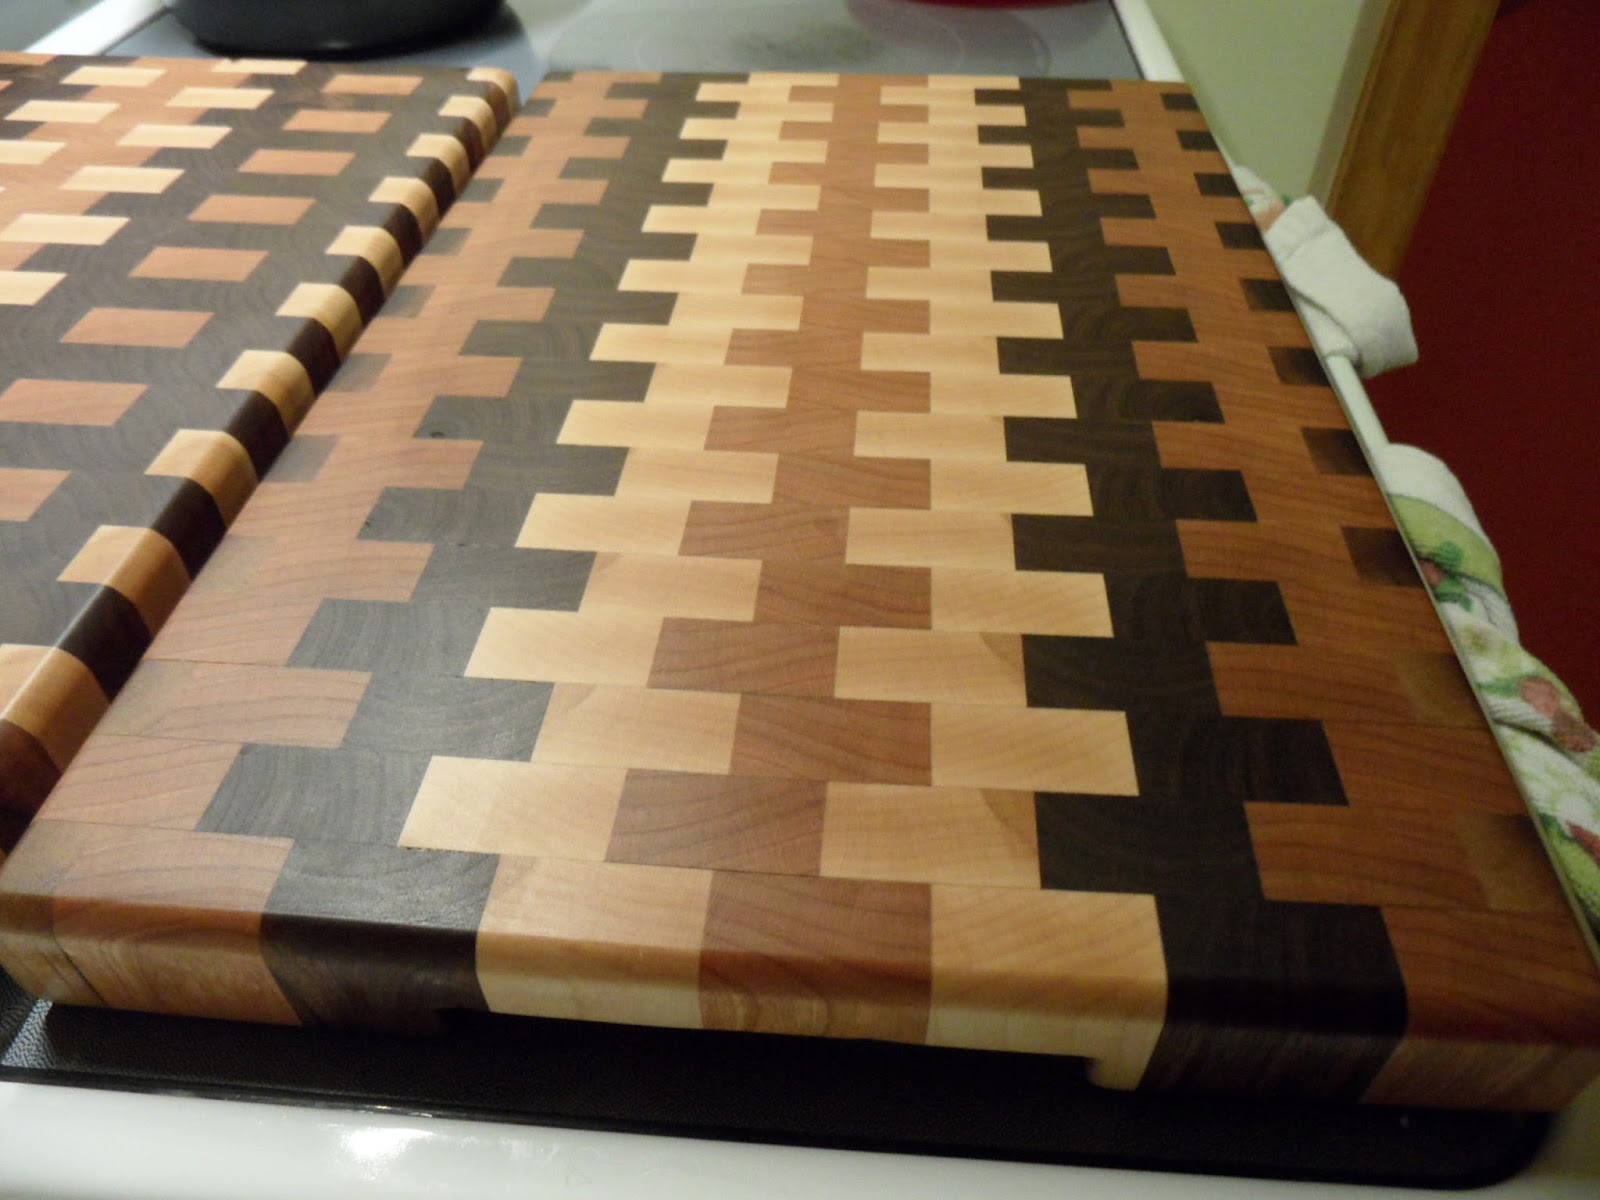 Here's my rough lumber. The cutting boards are made of walnut (left 